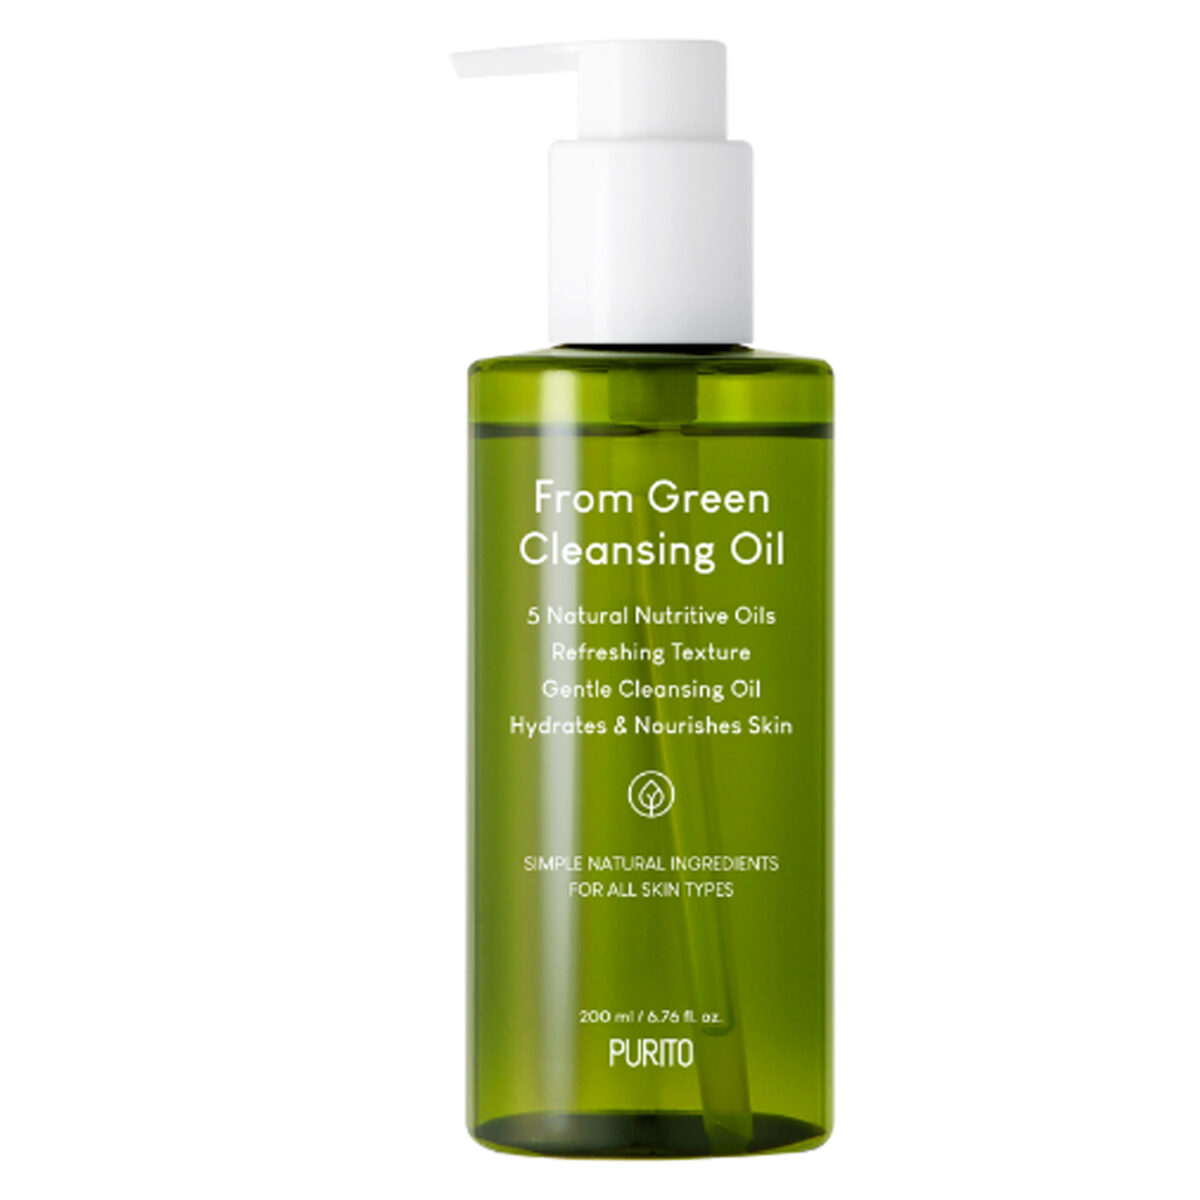 PURITO FROM GREEN CLEANSING OIL 200ML